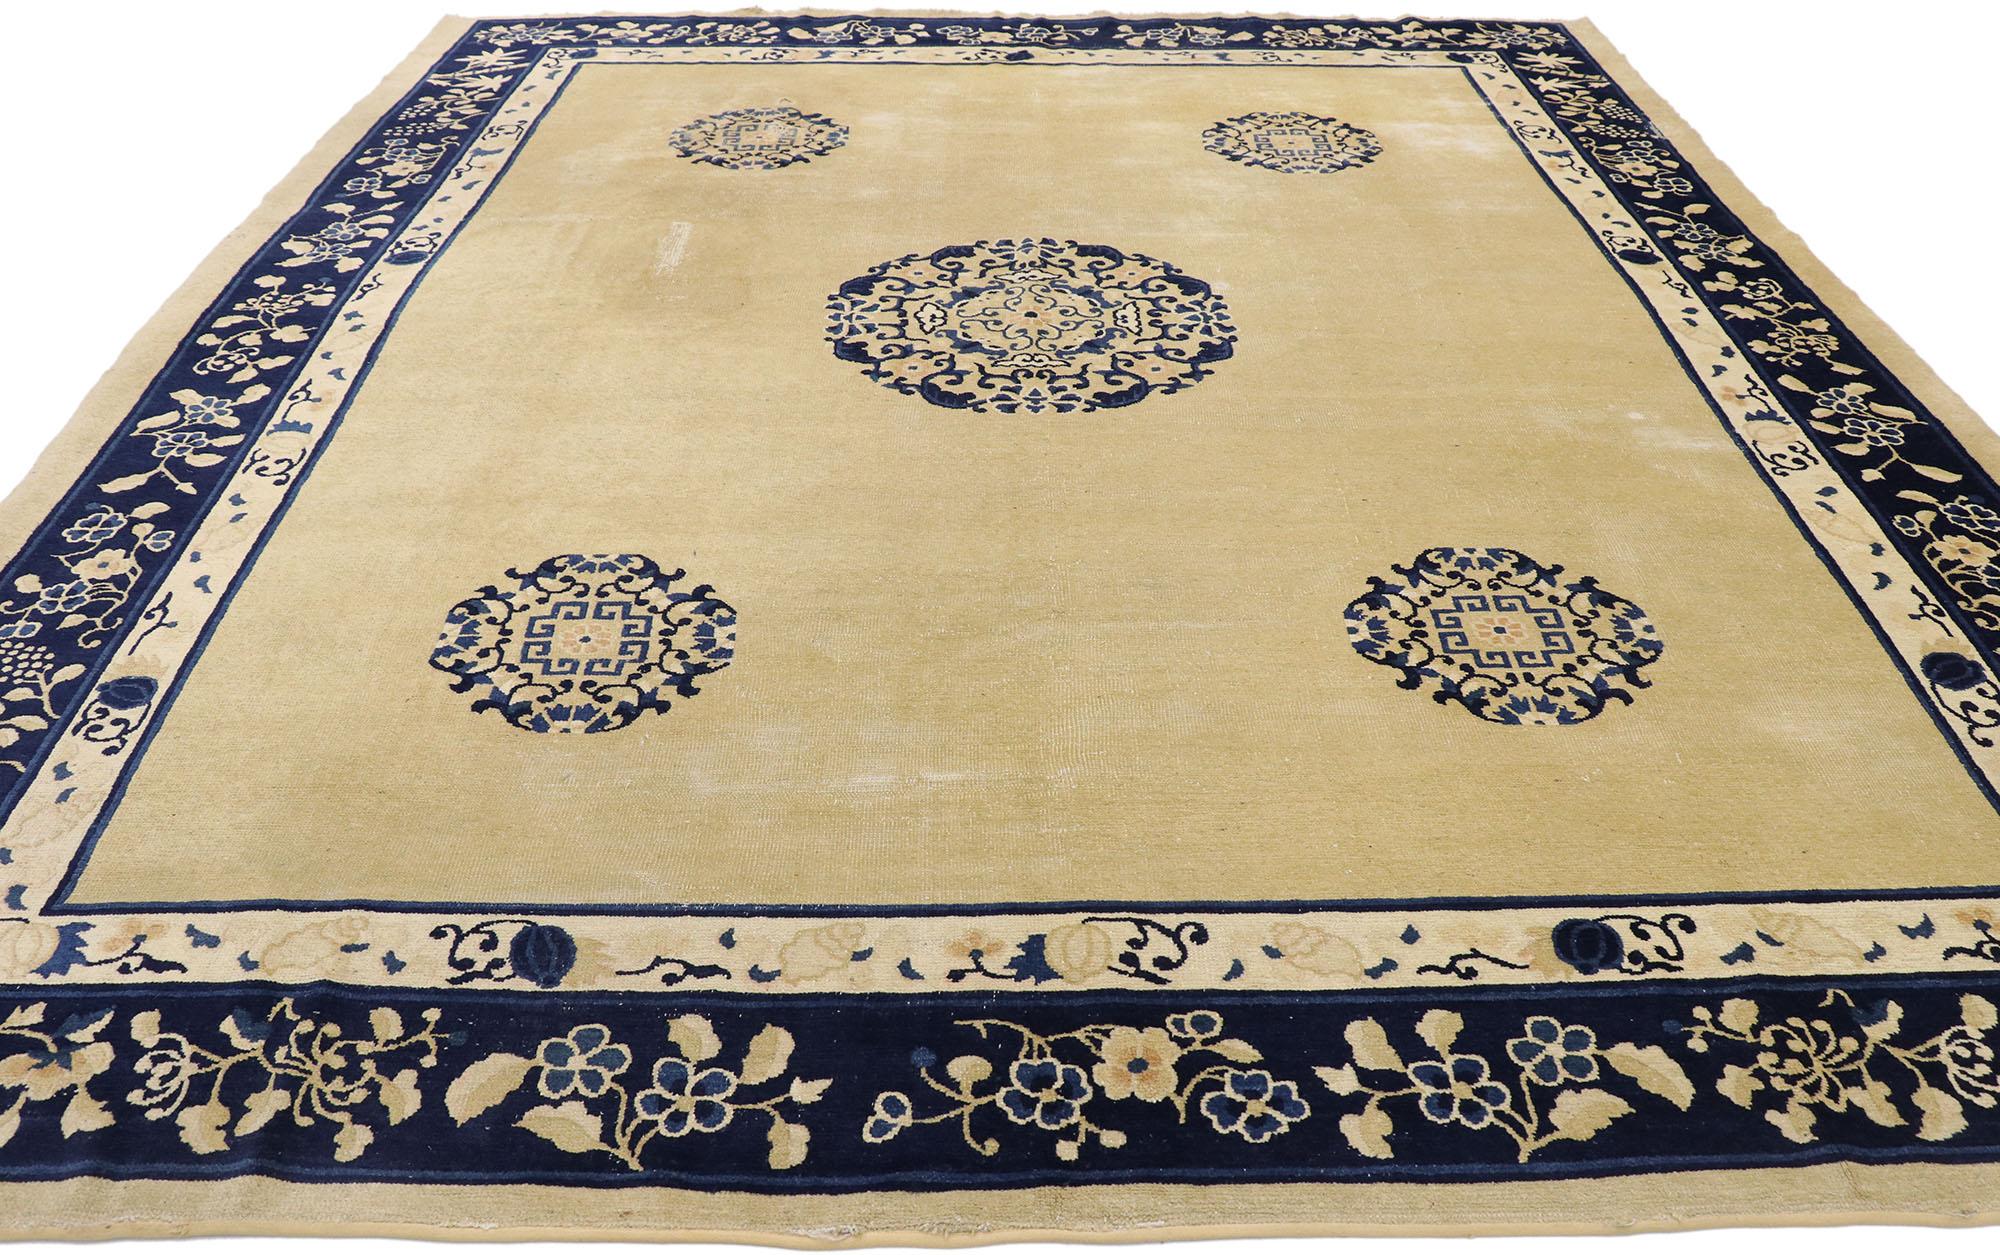 Hand-Knotted 1880s Distressed Antique Chinese Peking Rug with Classic Victorian Style